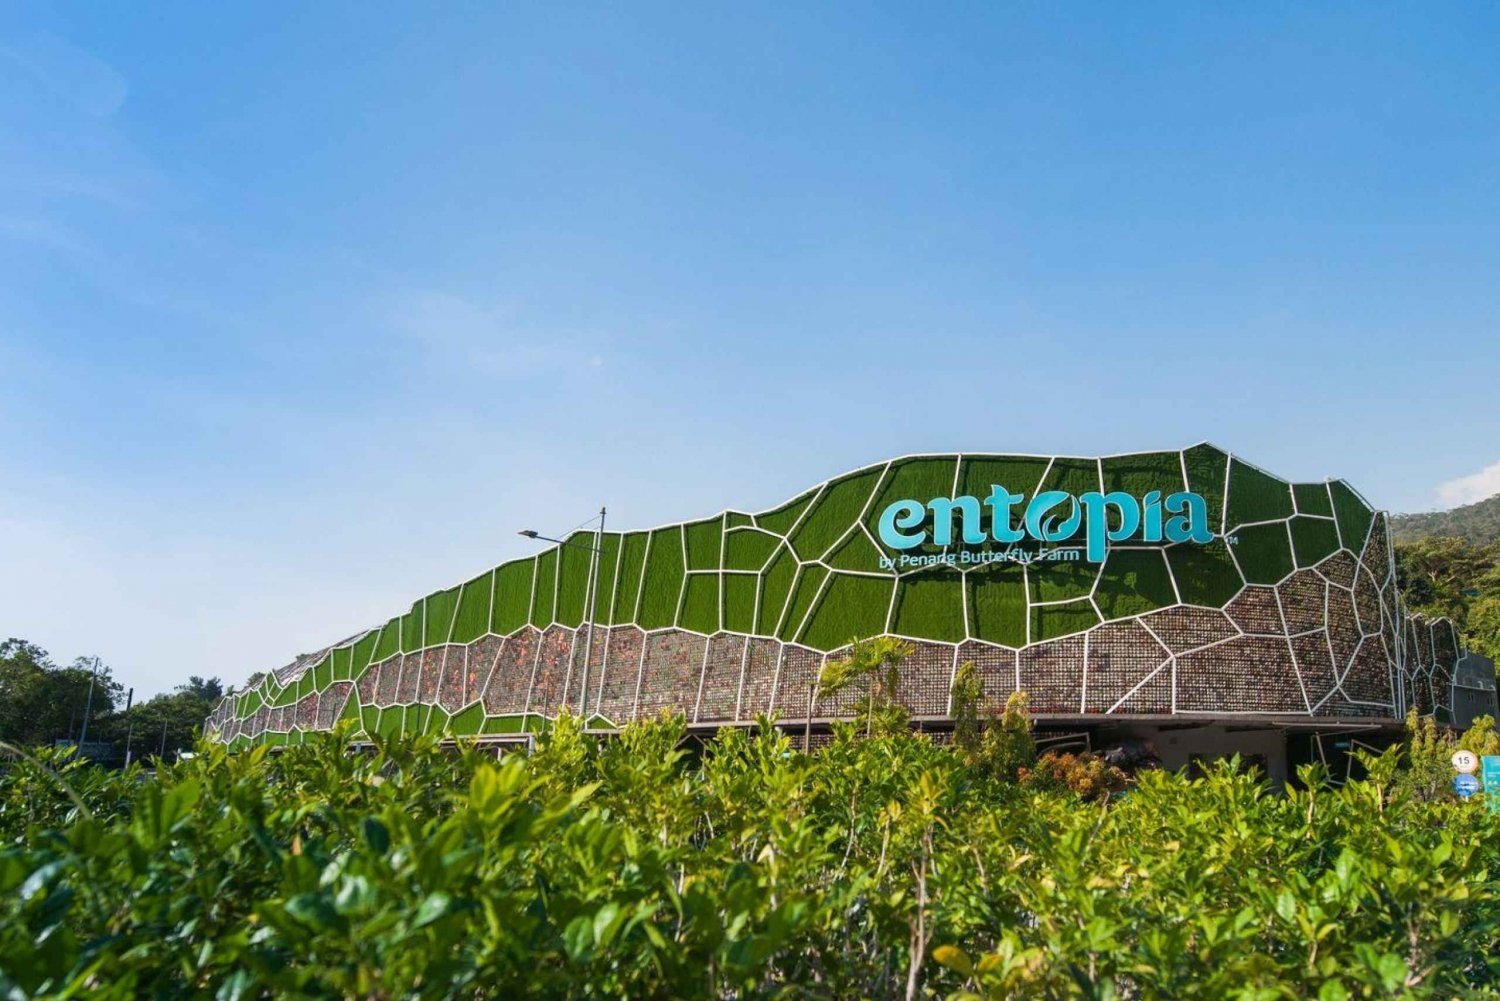 Penang: Entopia General Admission Tickets